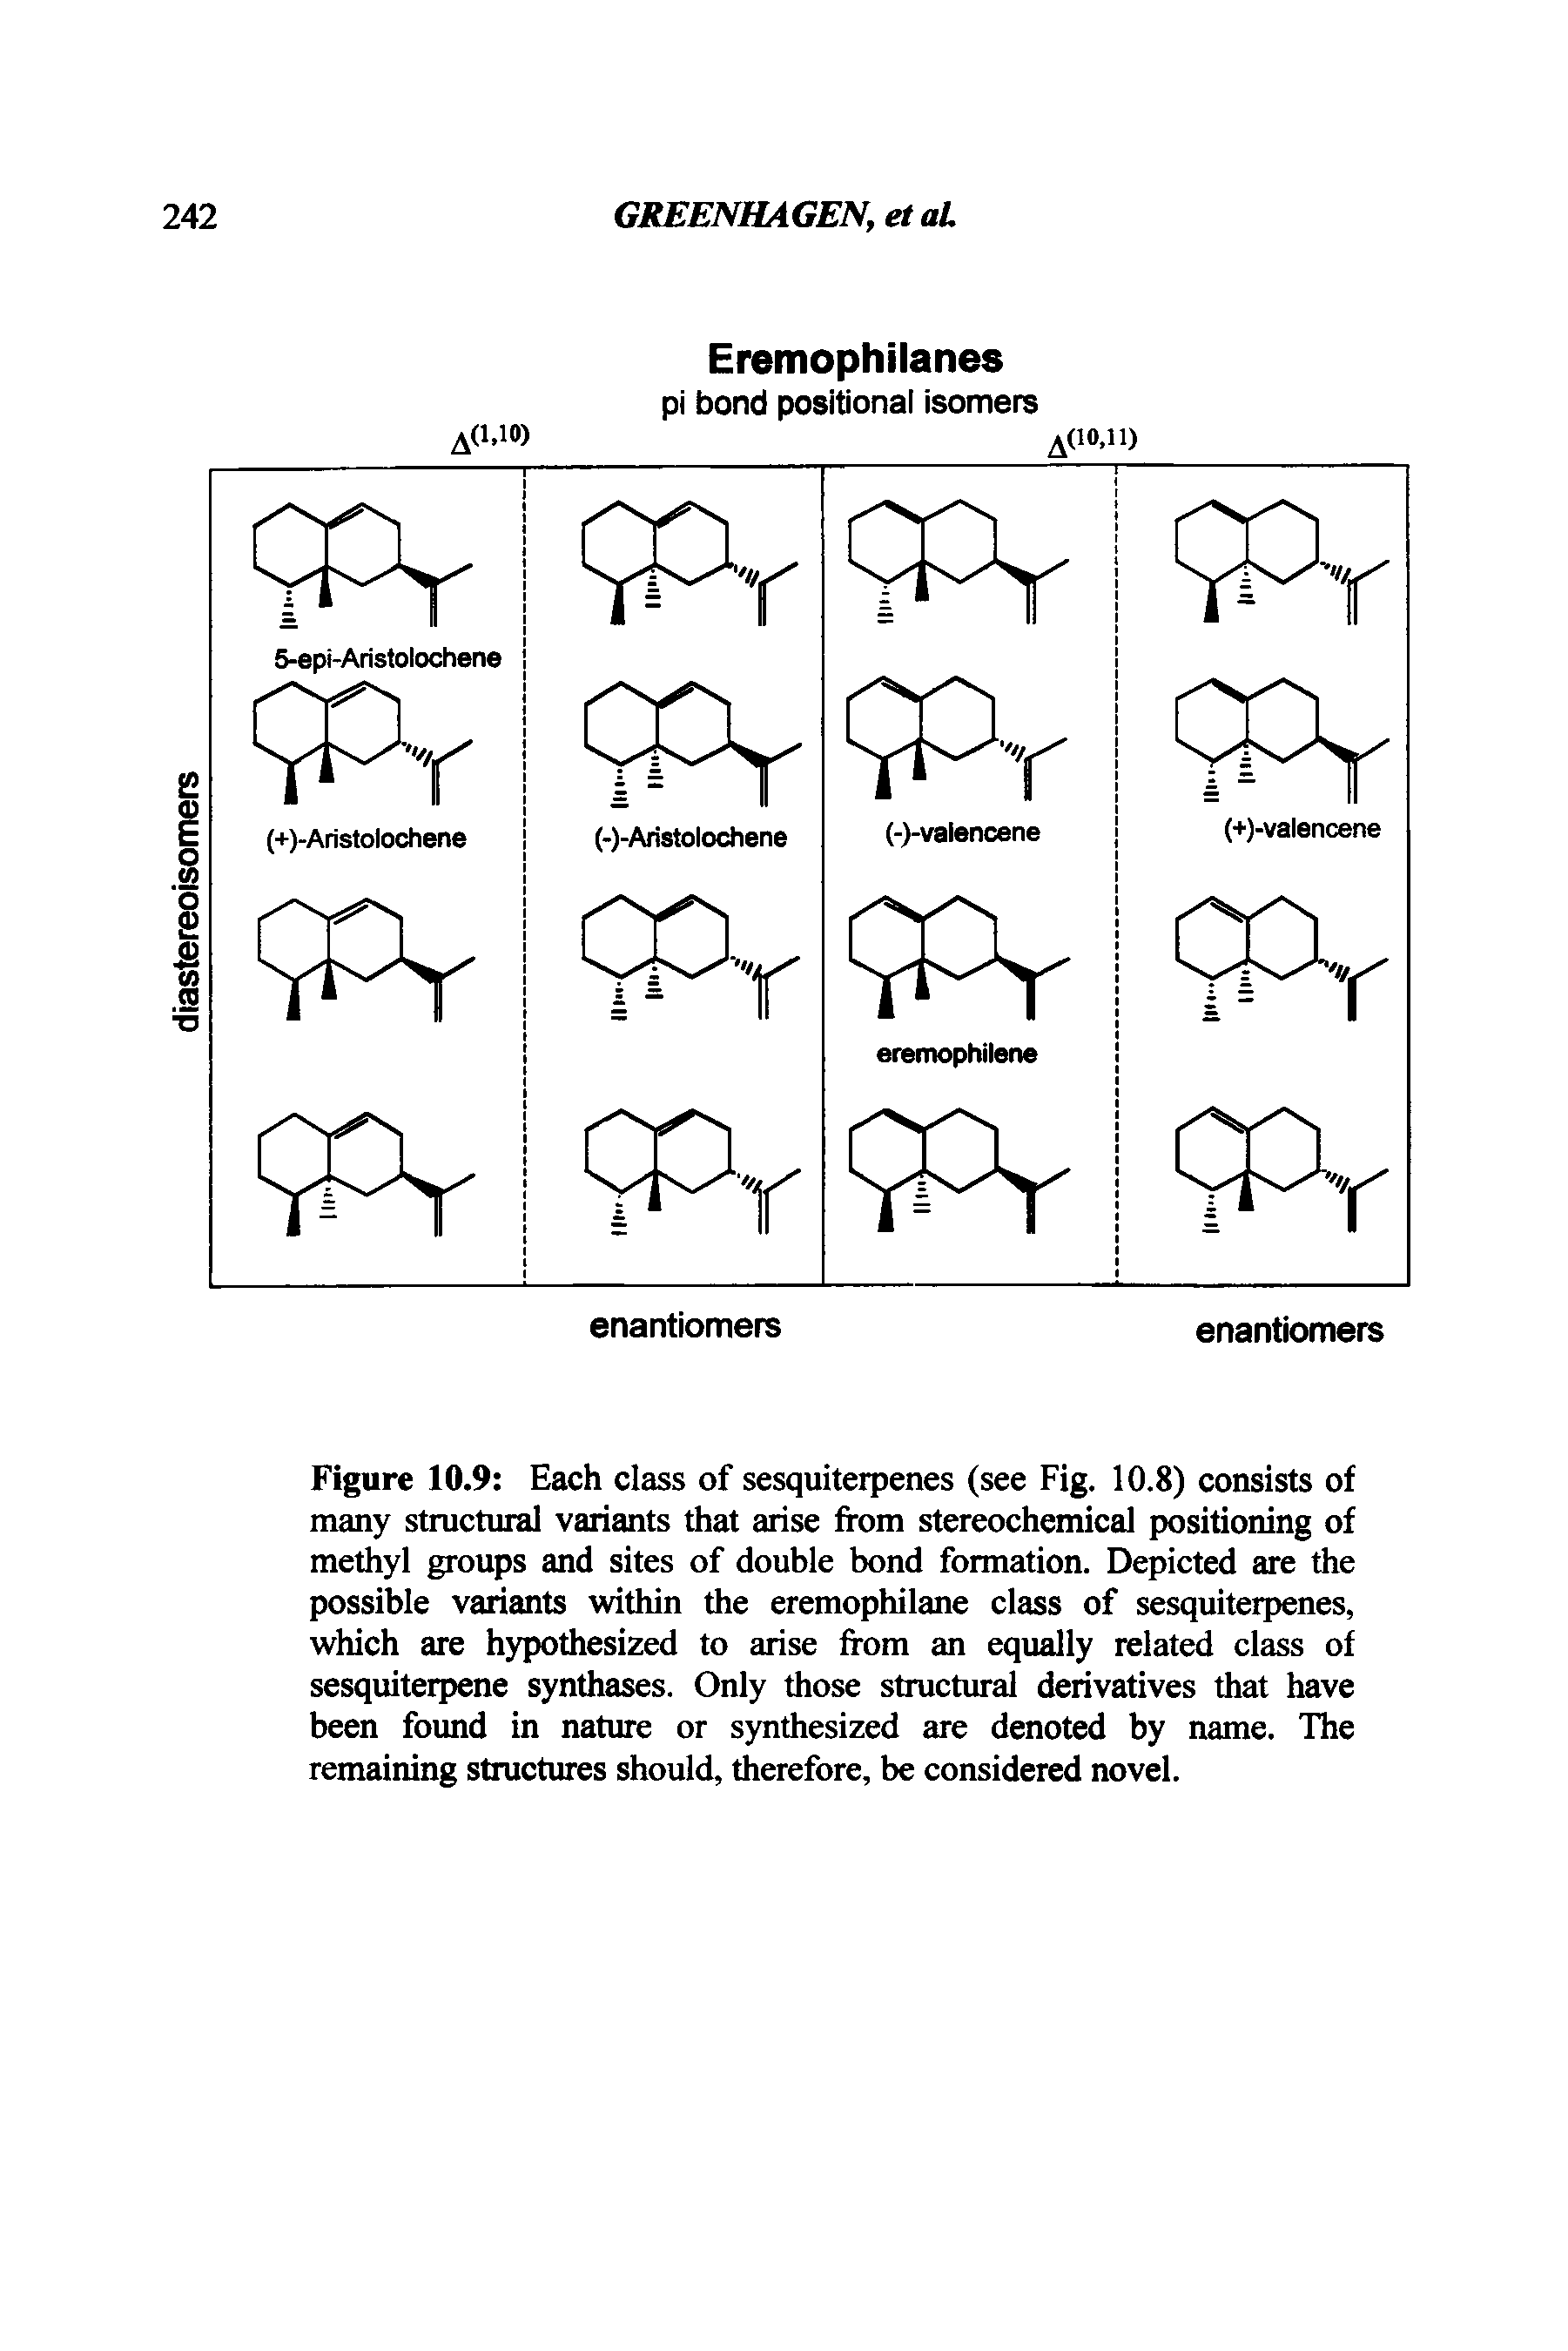 Figure 10.9 Each class of sesquiterpenes (see Fig. 10.8) consists of many structural variants that arise from stereochemical positioning of methyl groups and sites of double bond formation. Depicted are the possible variants within the eremophilane class of sesquiterpenes, which are hypothesized to arise from an equally related class of sesquiterpene synthases. Only those structural derivatives that have been found in nature or synthesized are denoted by name. The remaining structures should, therefore, be considered novel.